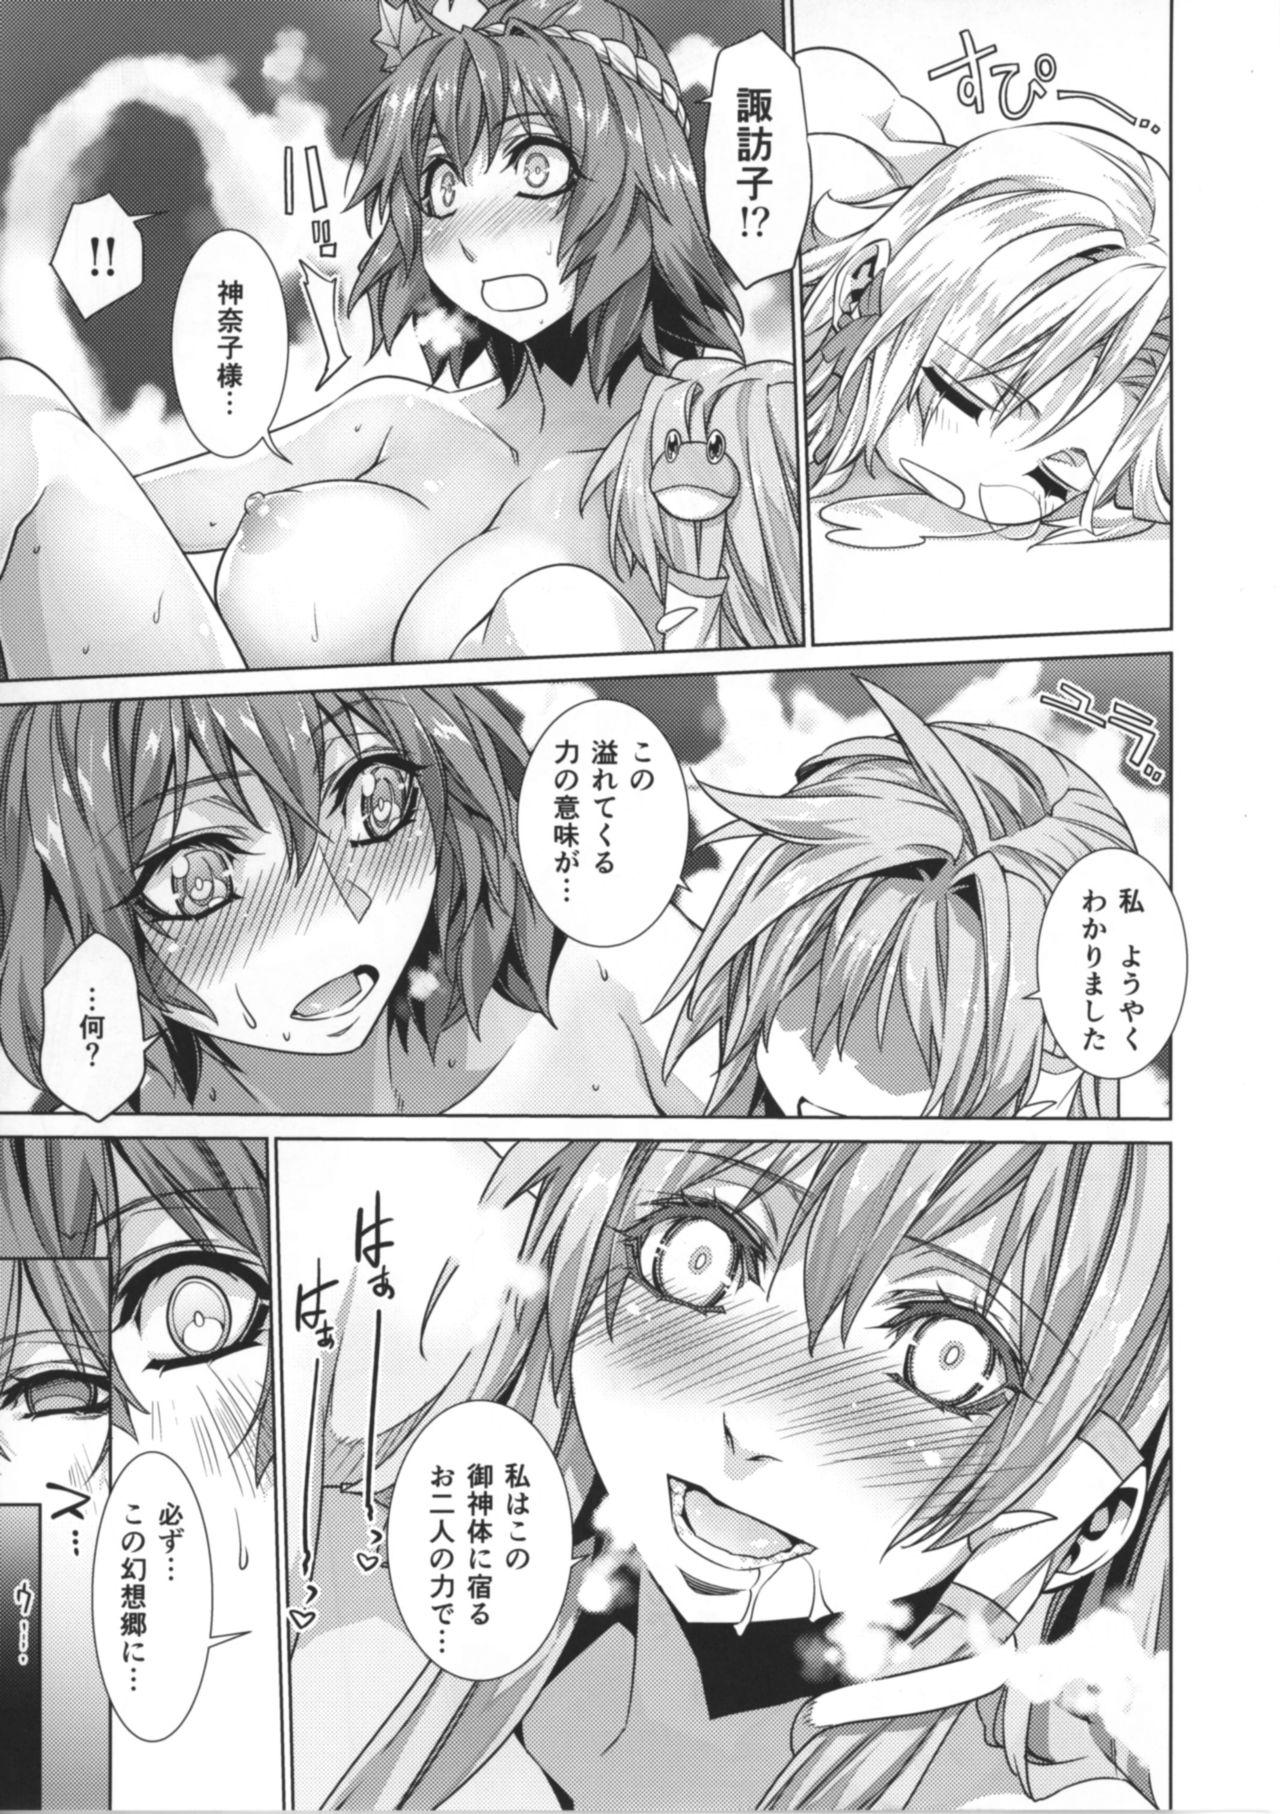 Milf Porn Sanae Udon 10 tama - Touhou project Dykes - Page 8